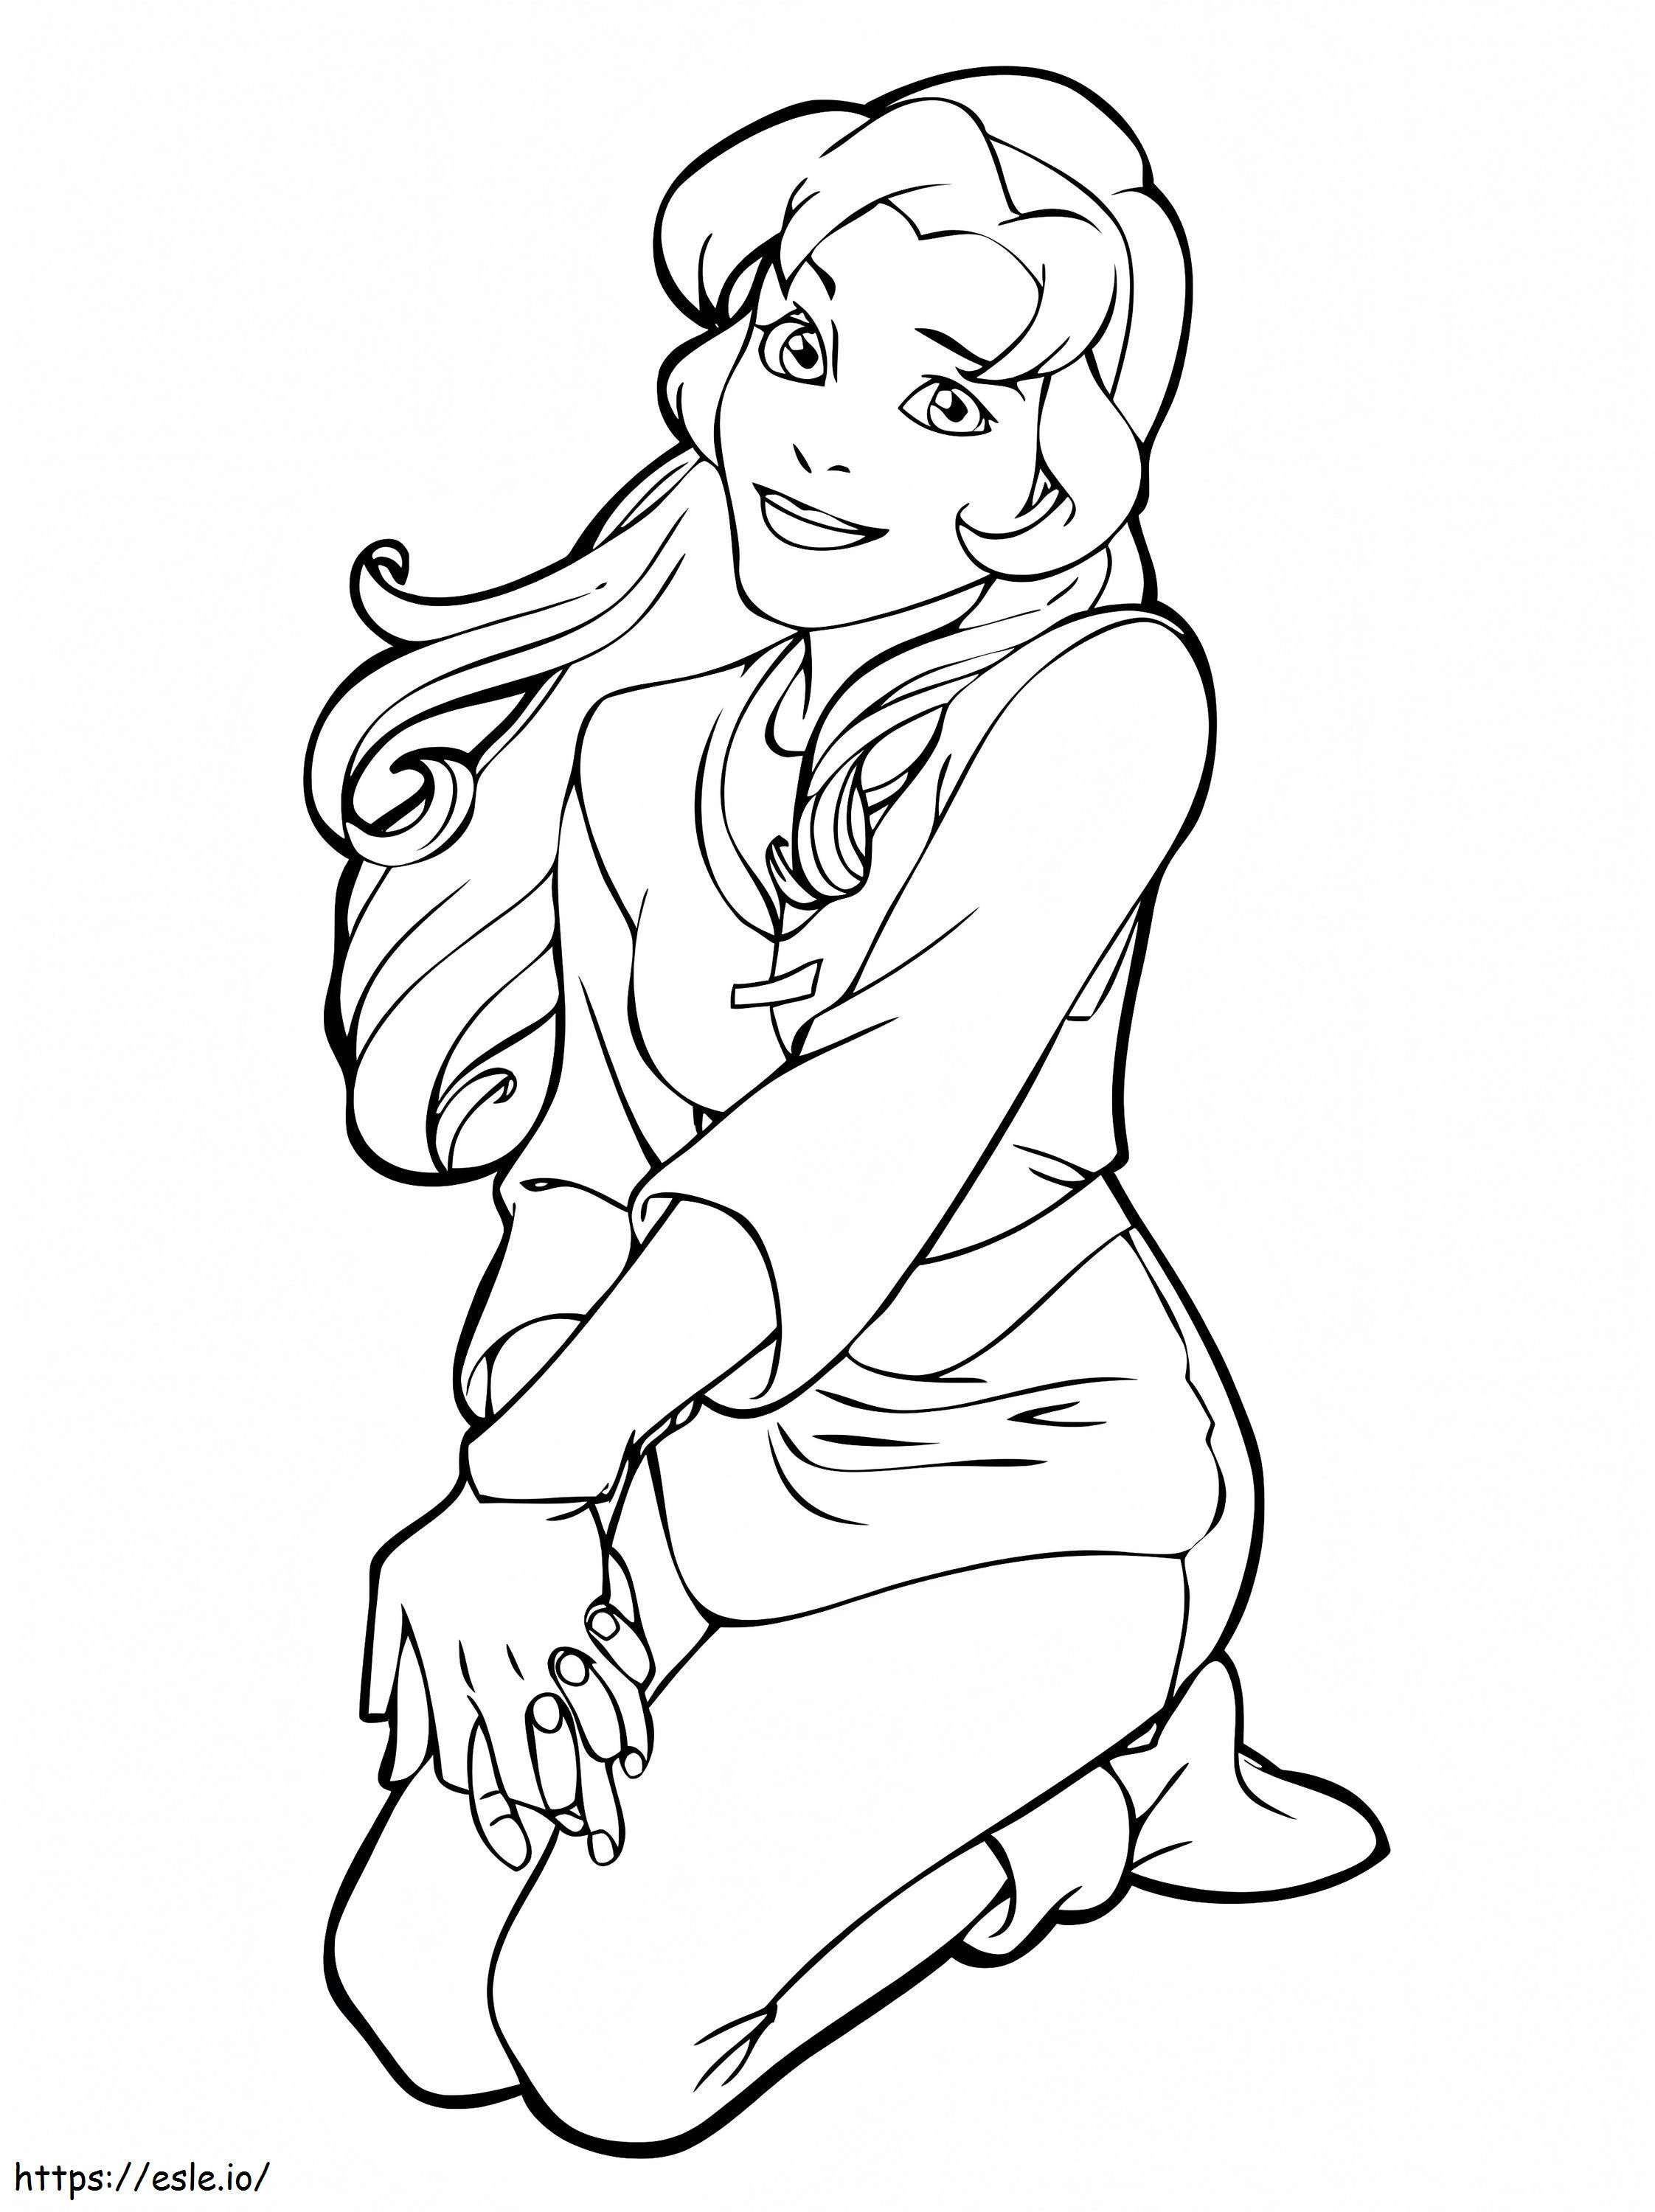 Quest For Camelot 6 coloring page